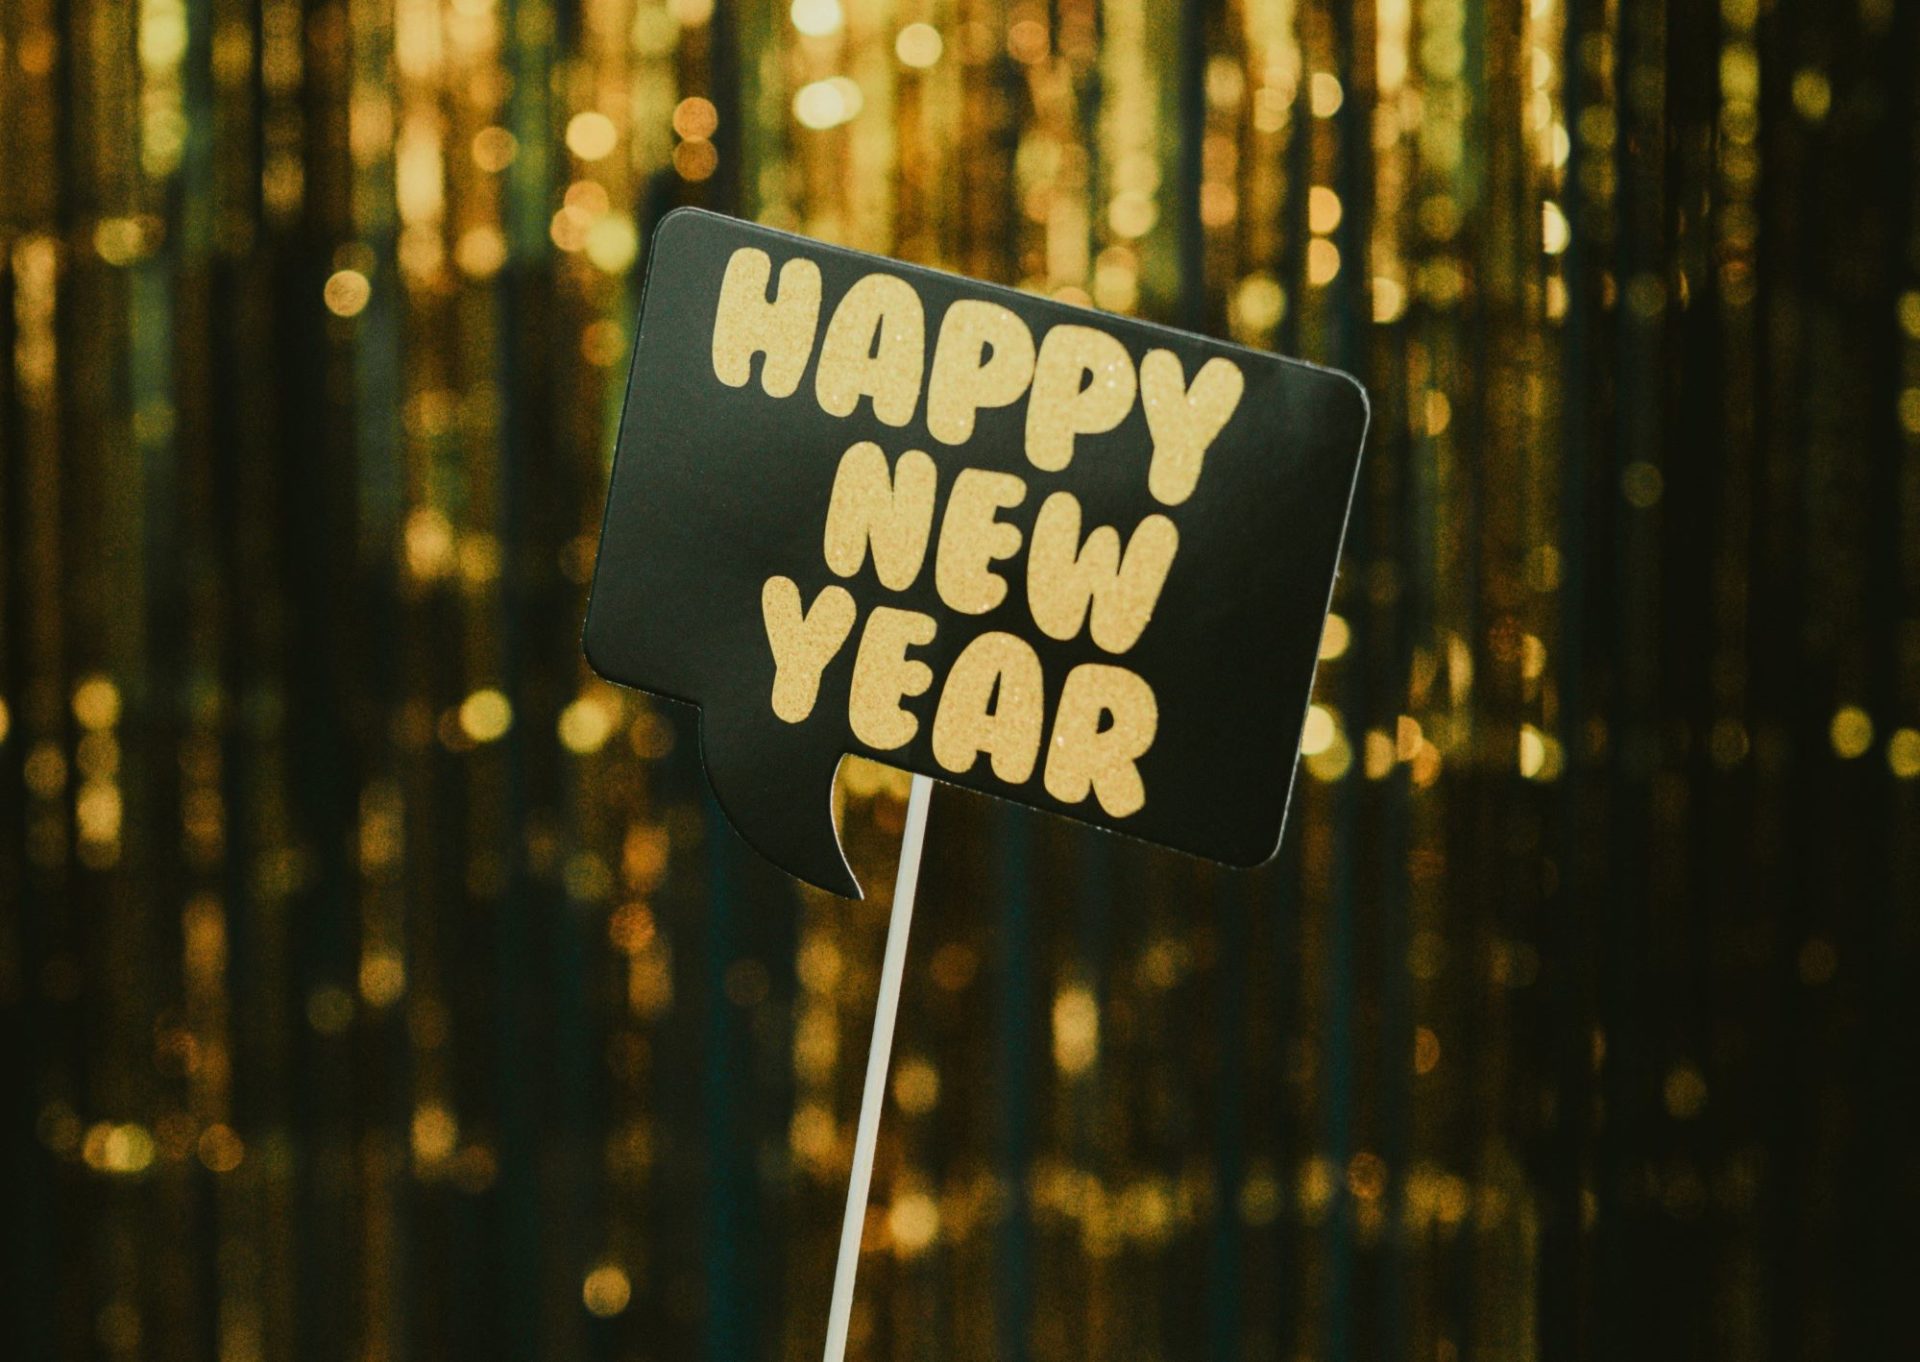 A small black sign on a wooden stick. It says Happy New Year in gold lettering. Gold tinsel hangs in the background.